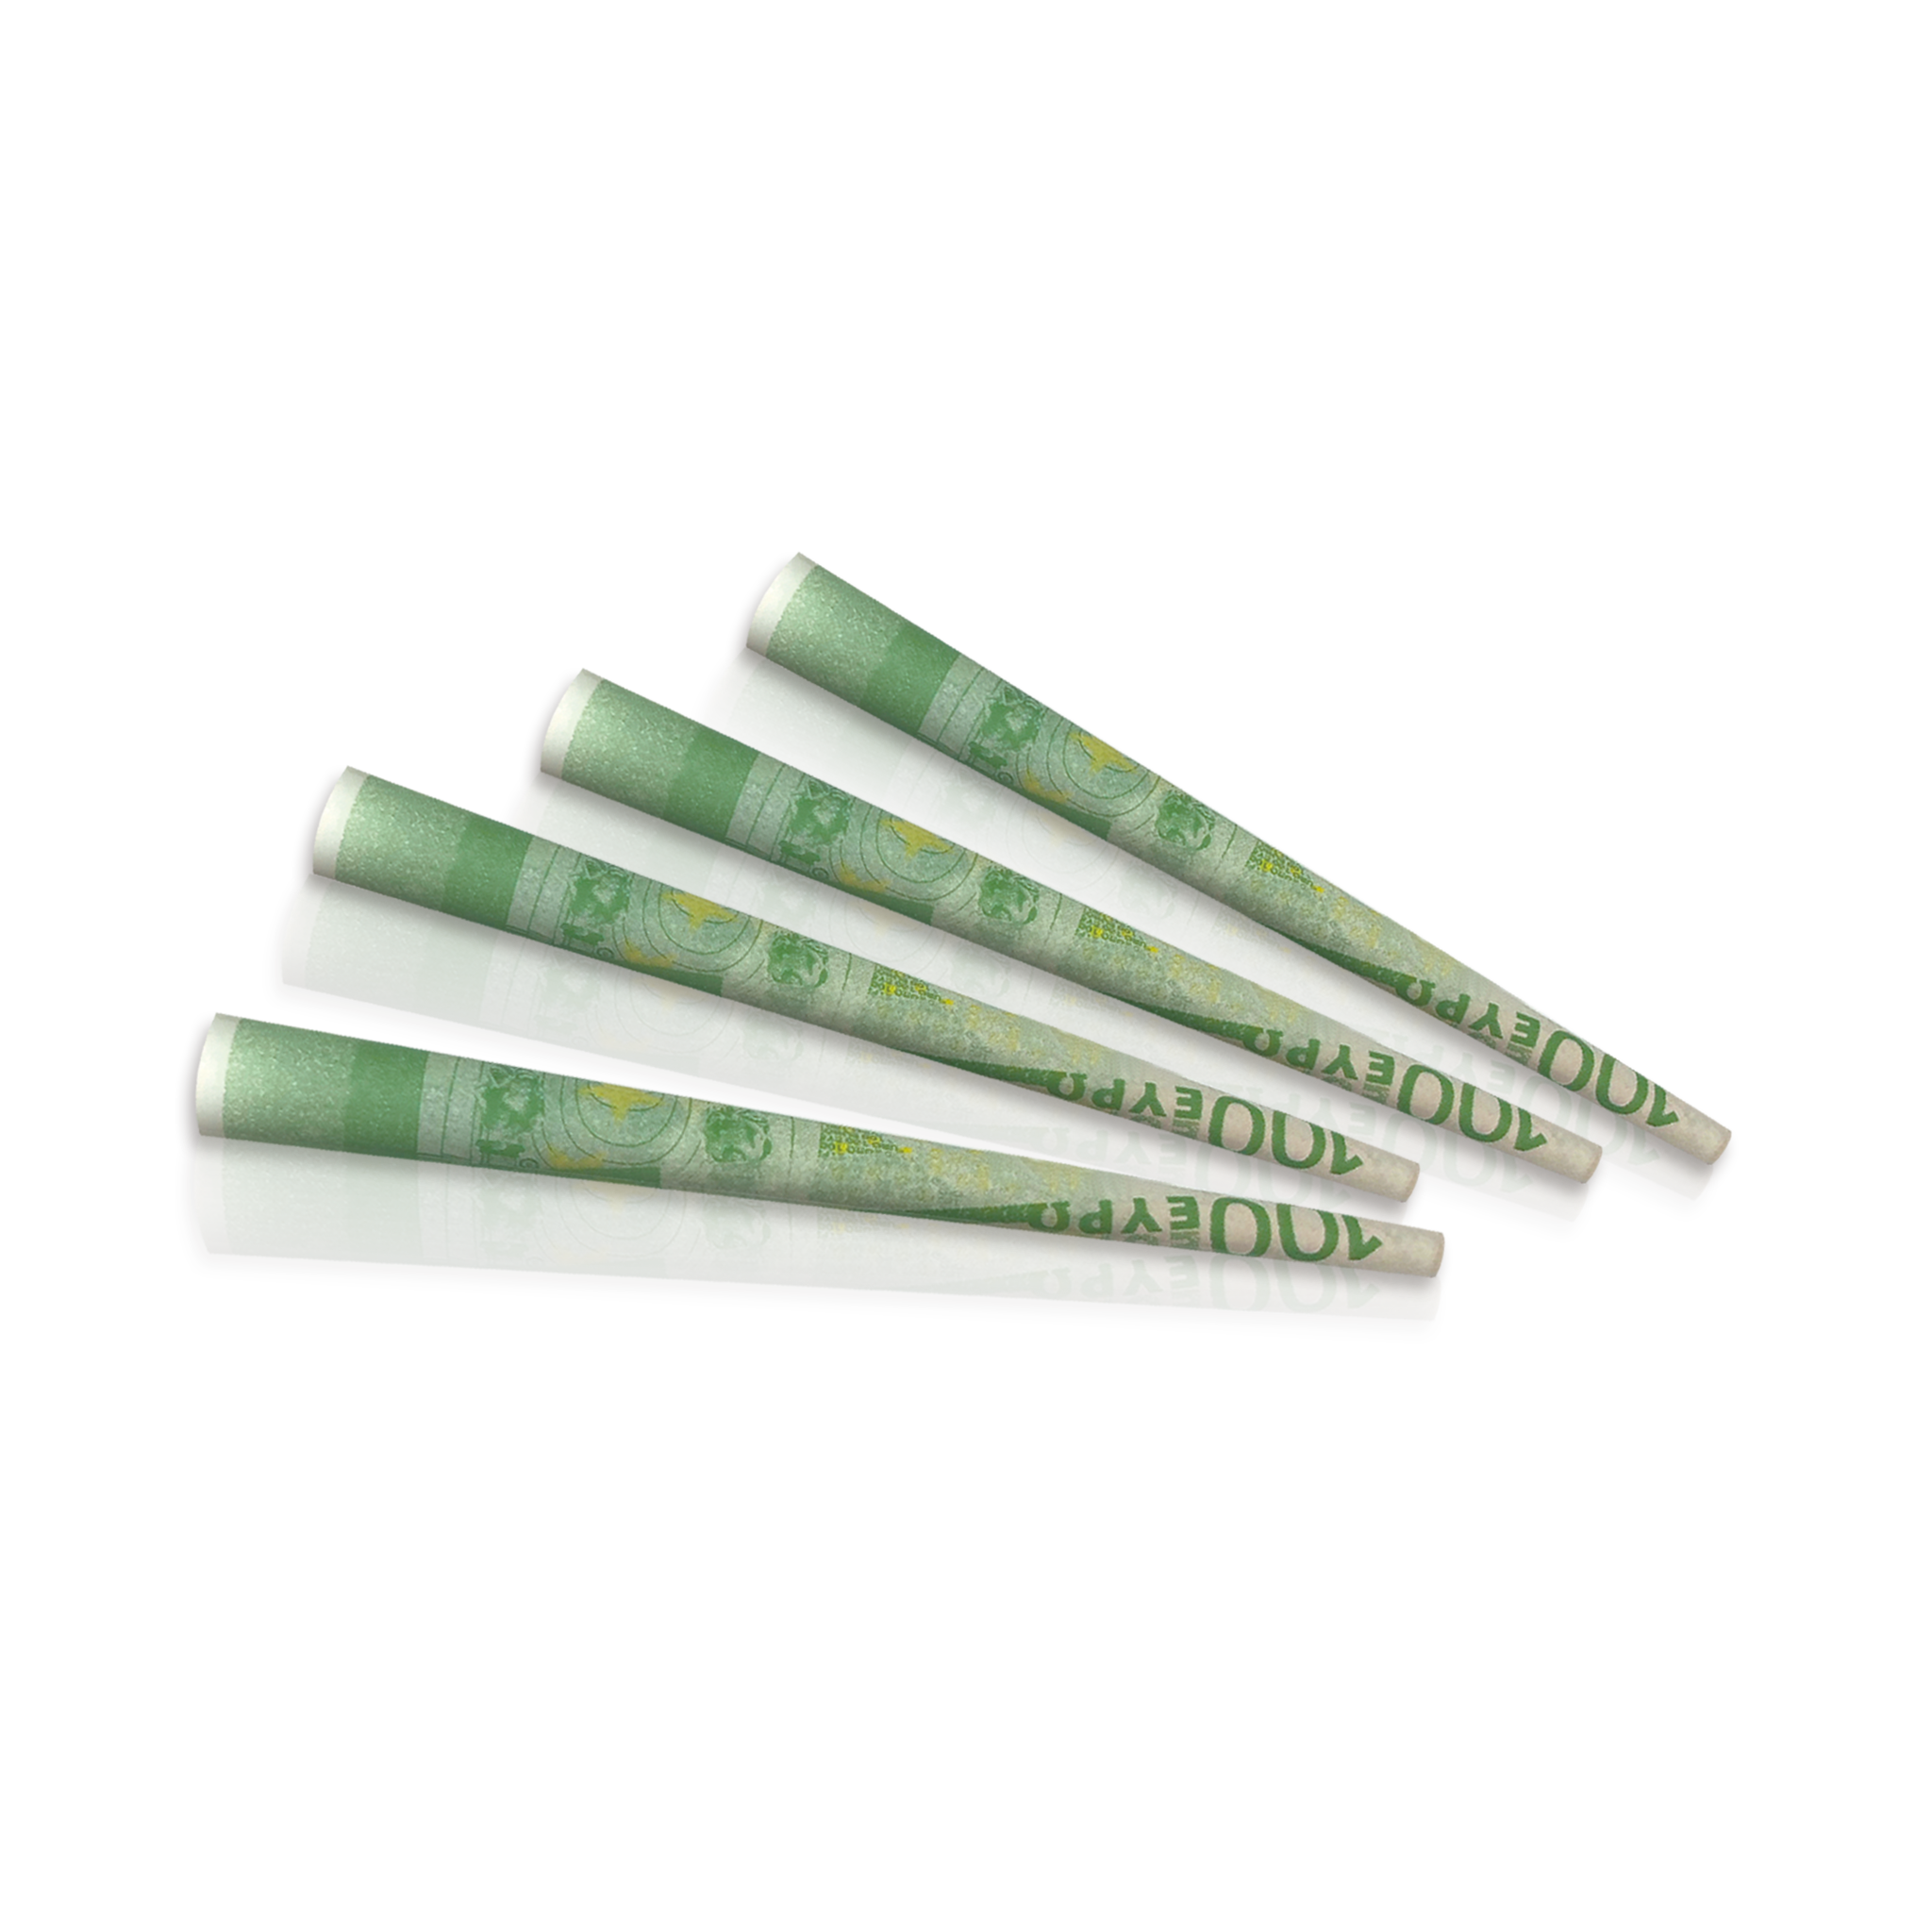 POWER PAPERS™ EUR€100 Pre Rolled Cones